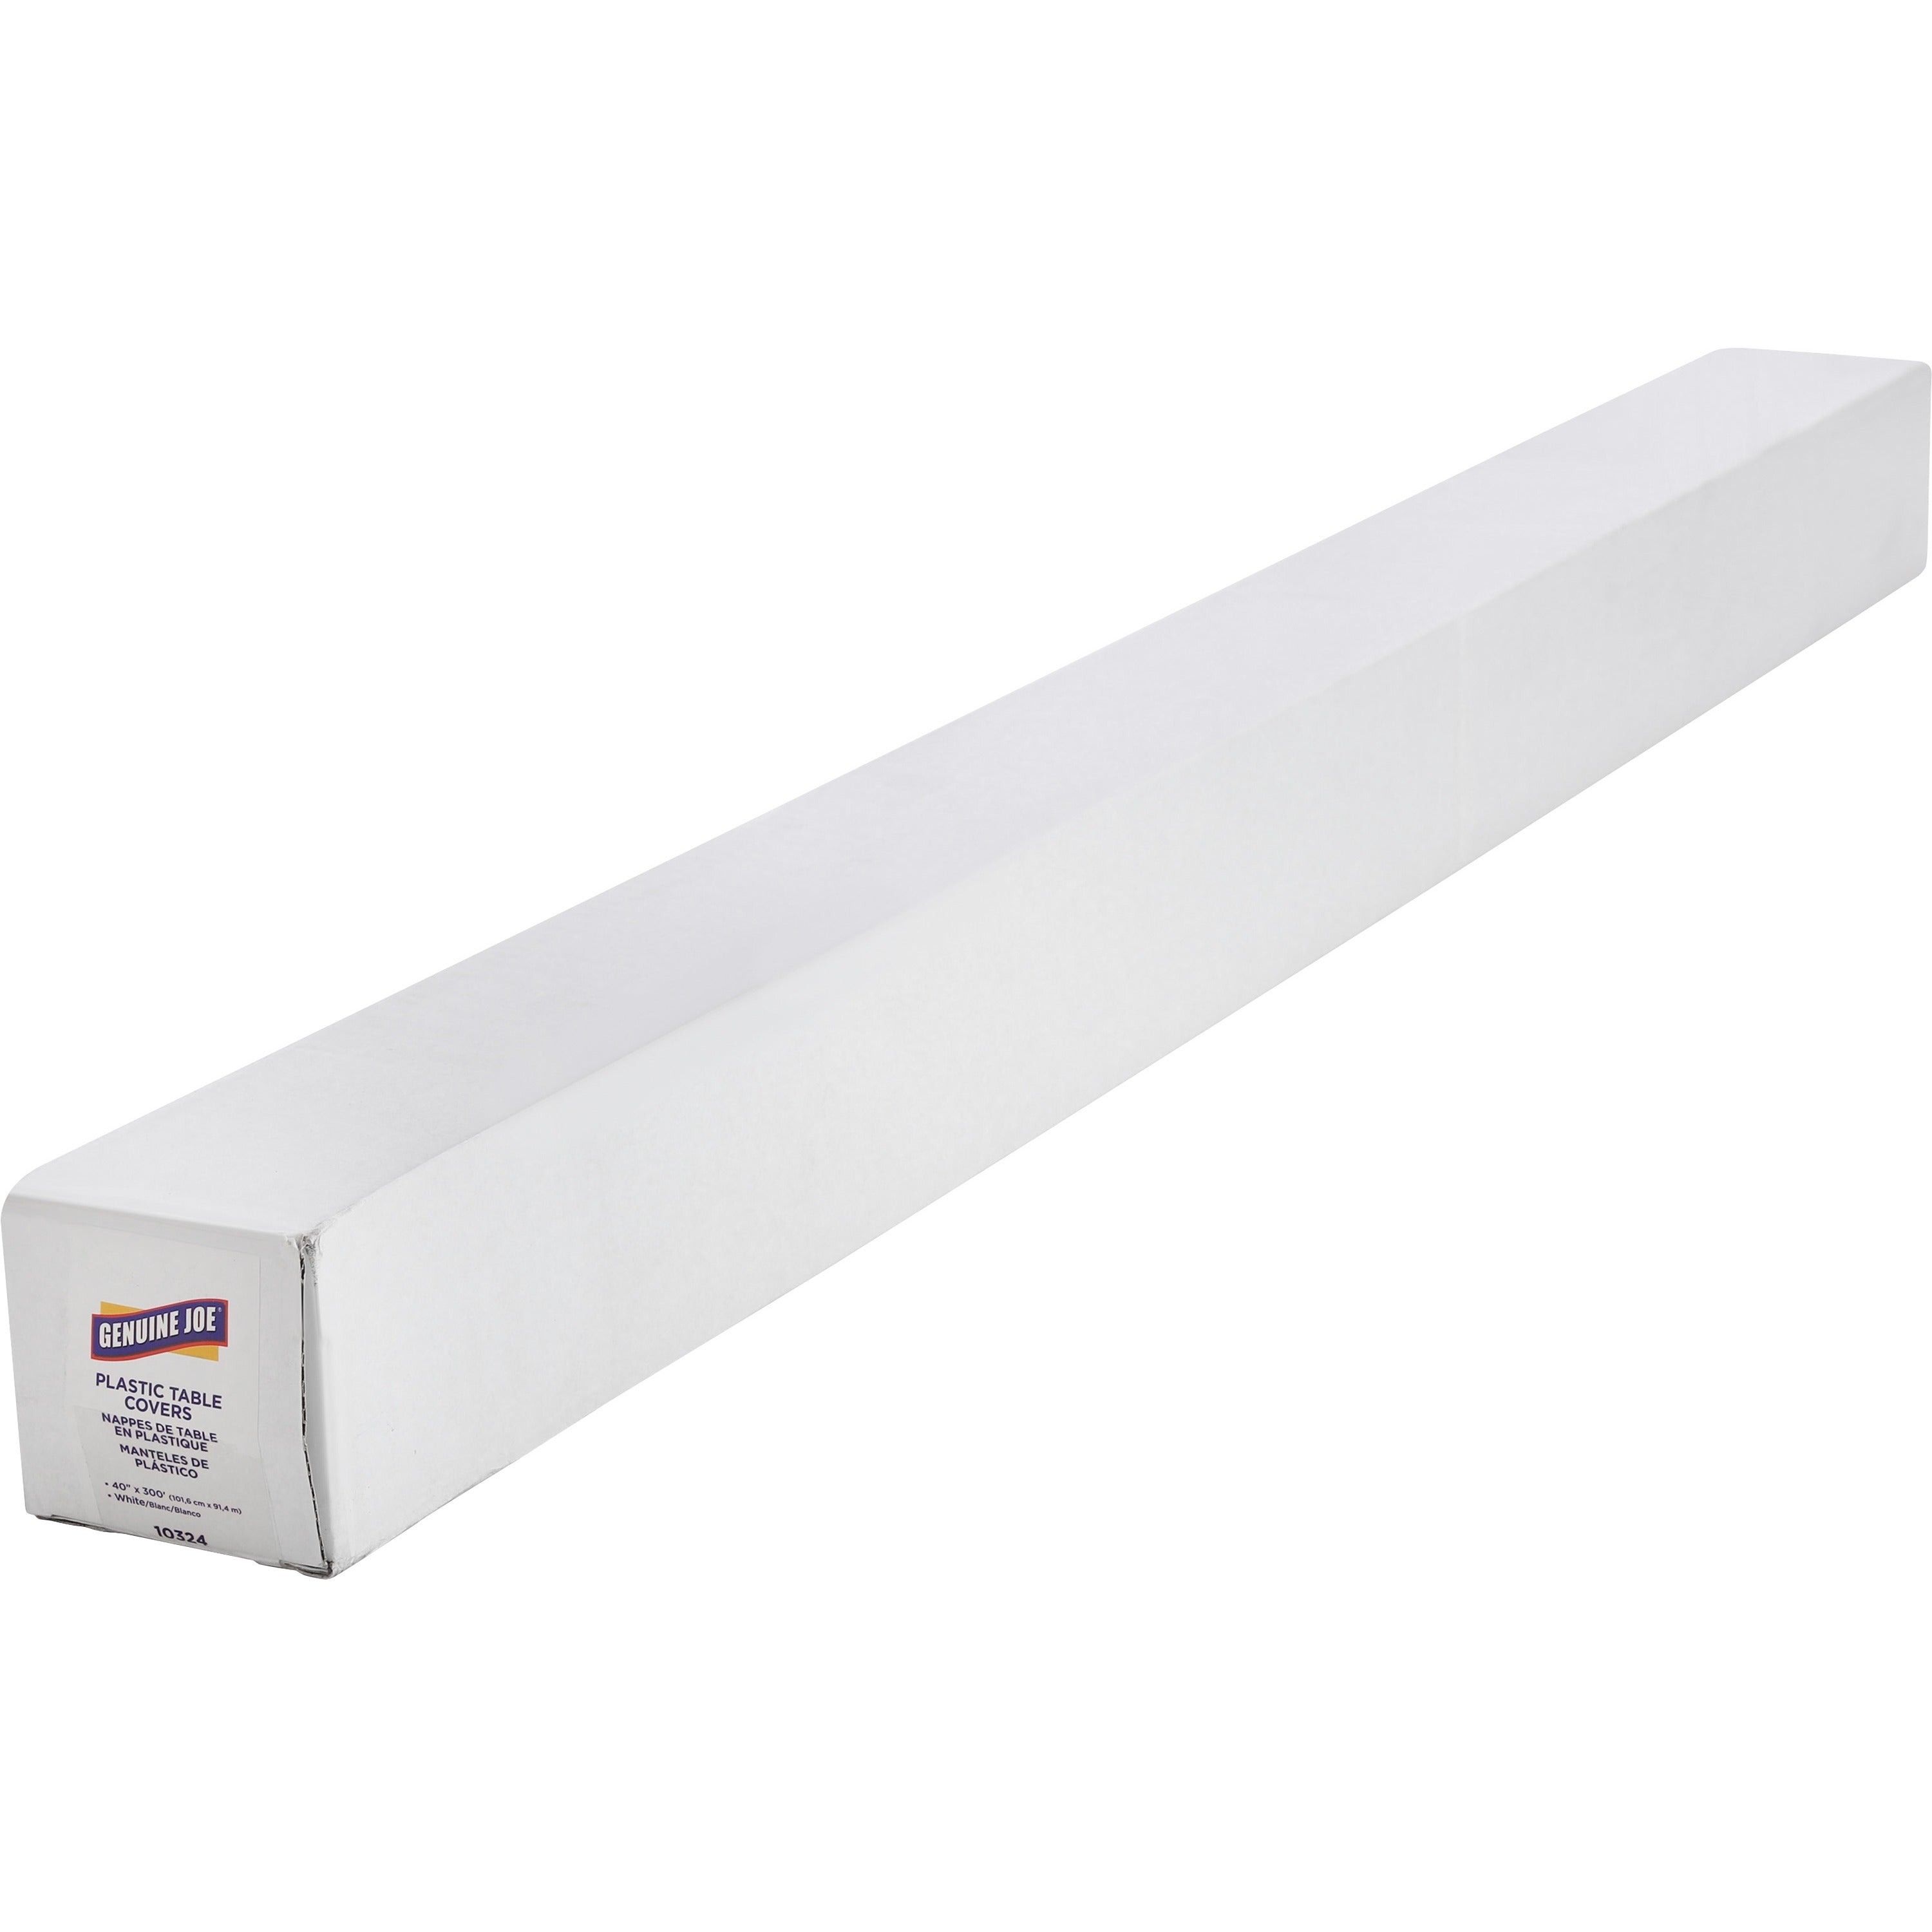 Genuine Joe Banquet-Size Plastic Tablecover - 300 ft Length x 40" Width - Plastic - White - 1 / Roll - 